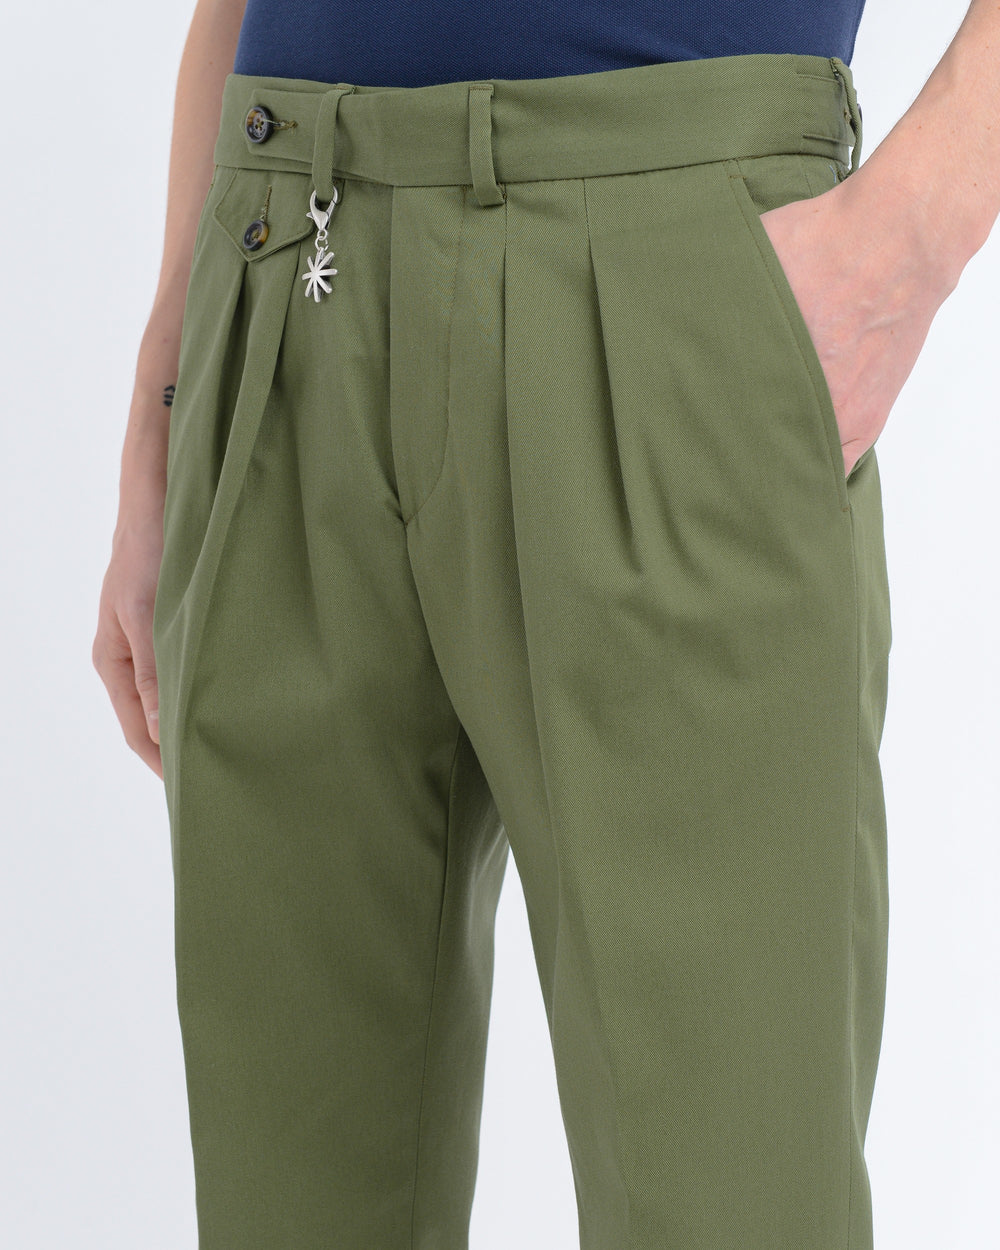 green double pleat baggy twill cotton blend trousers